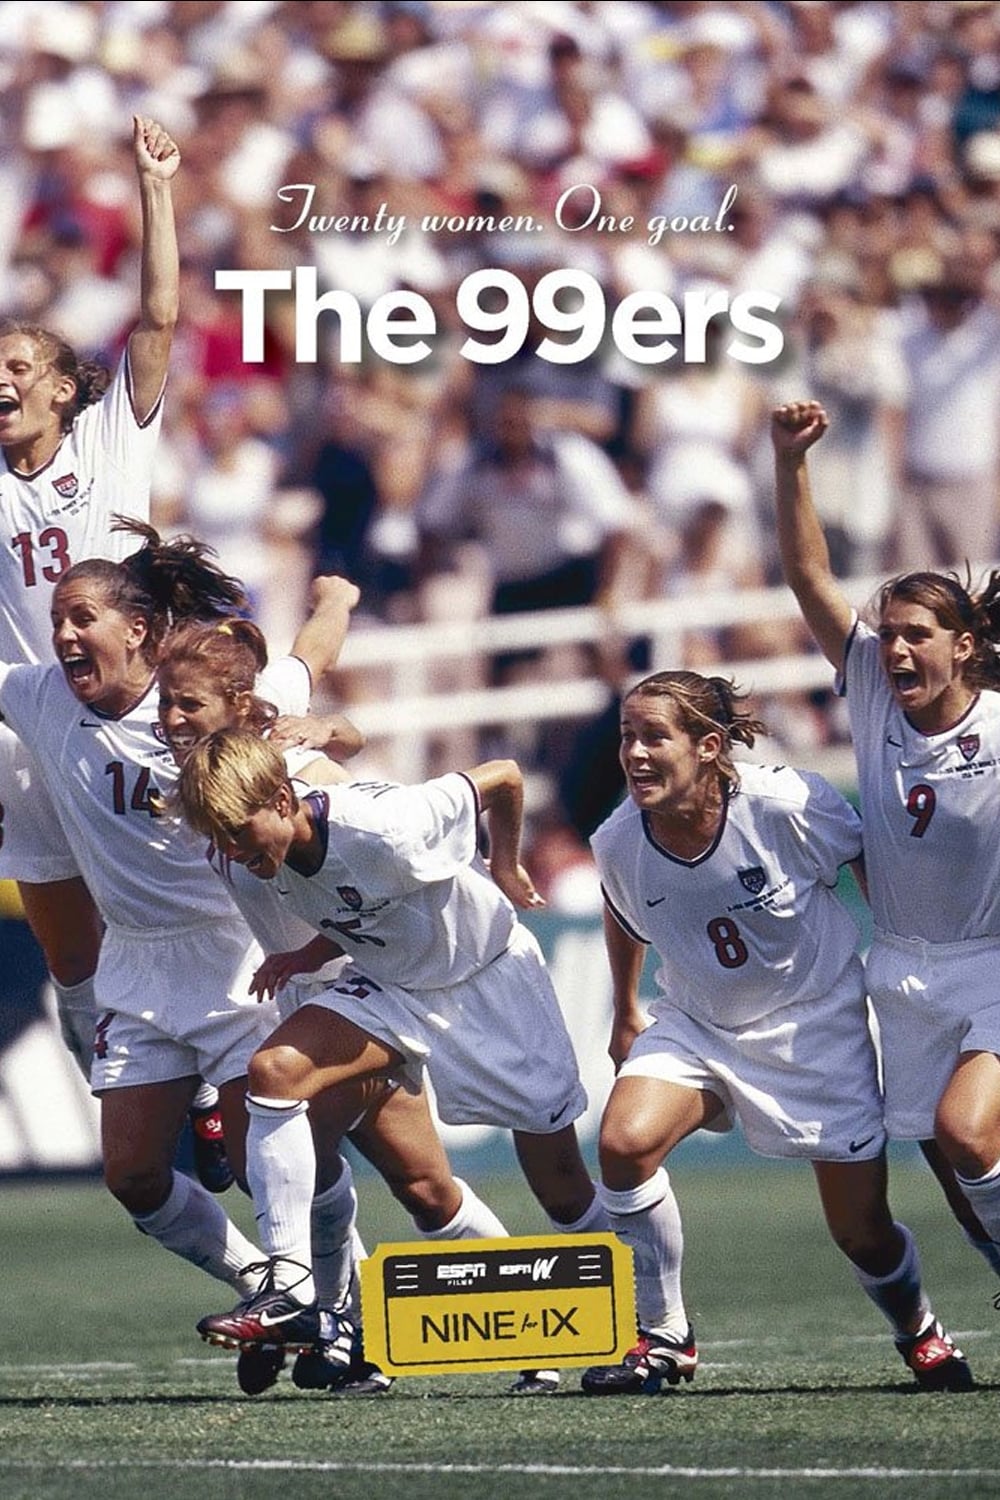 The '99ers